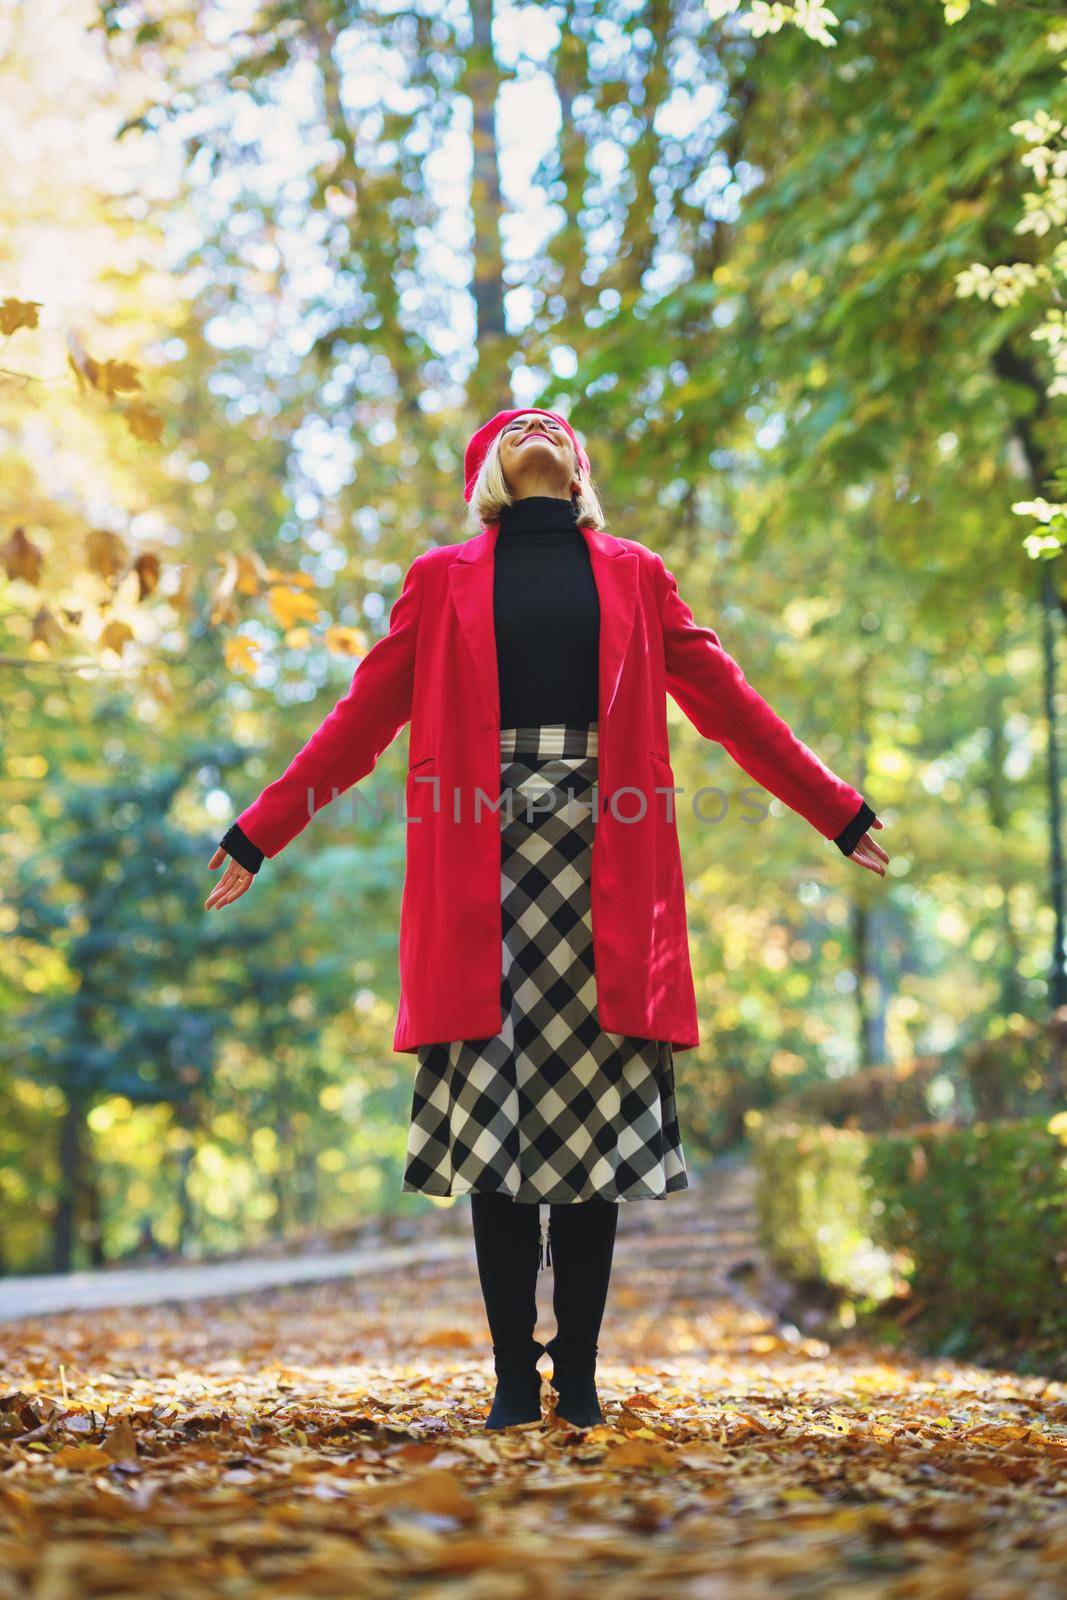 Happy woman opening her arms with her eyes closed in a park full of autumn leaves. Female wearing coat, skirt and beret outdoors.